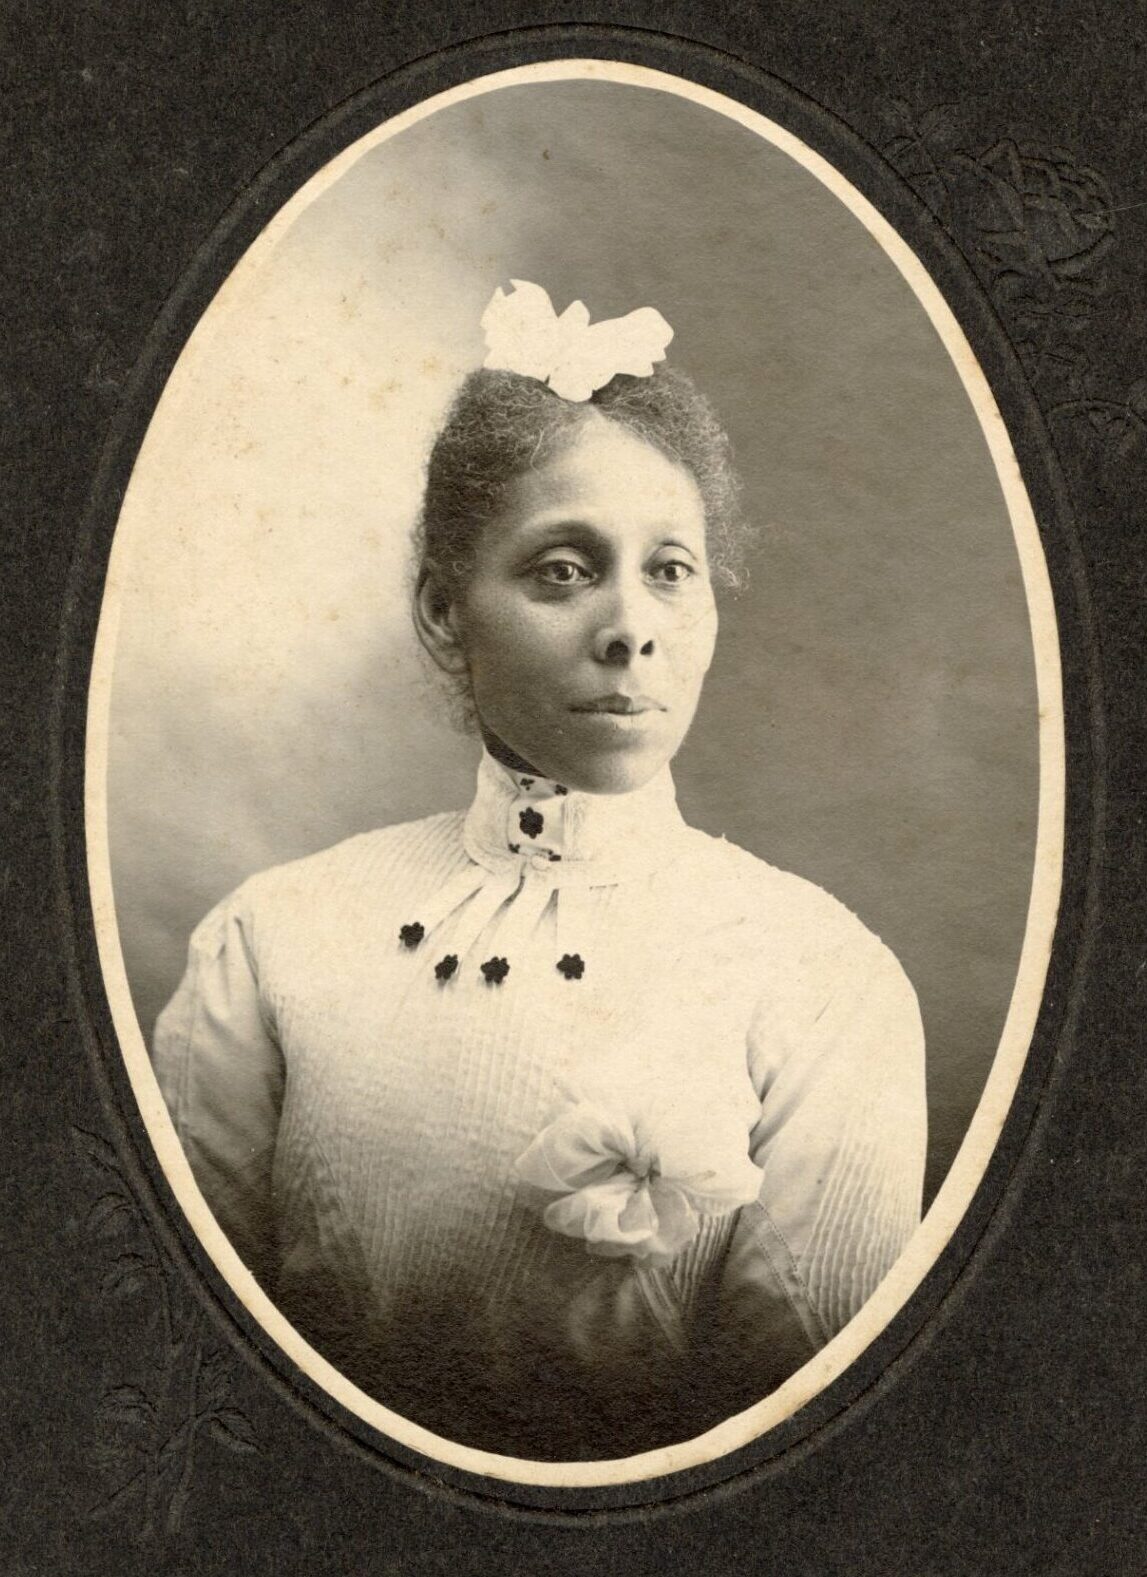 Studio portrait of Black woman wearing a fancy white blouse and a bow or hat on her head.